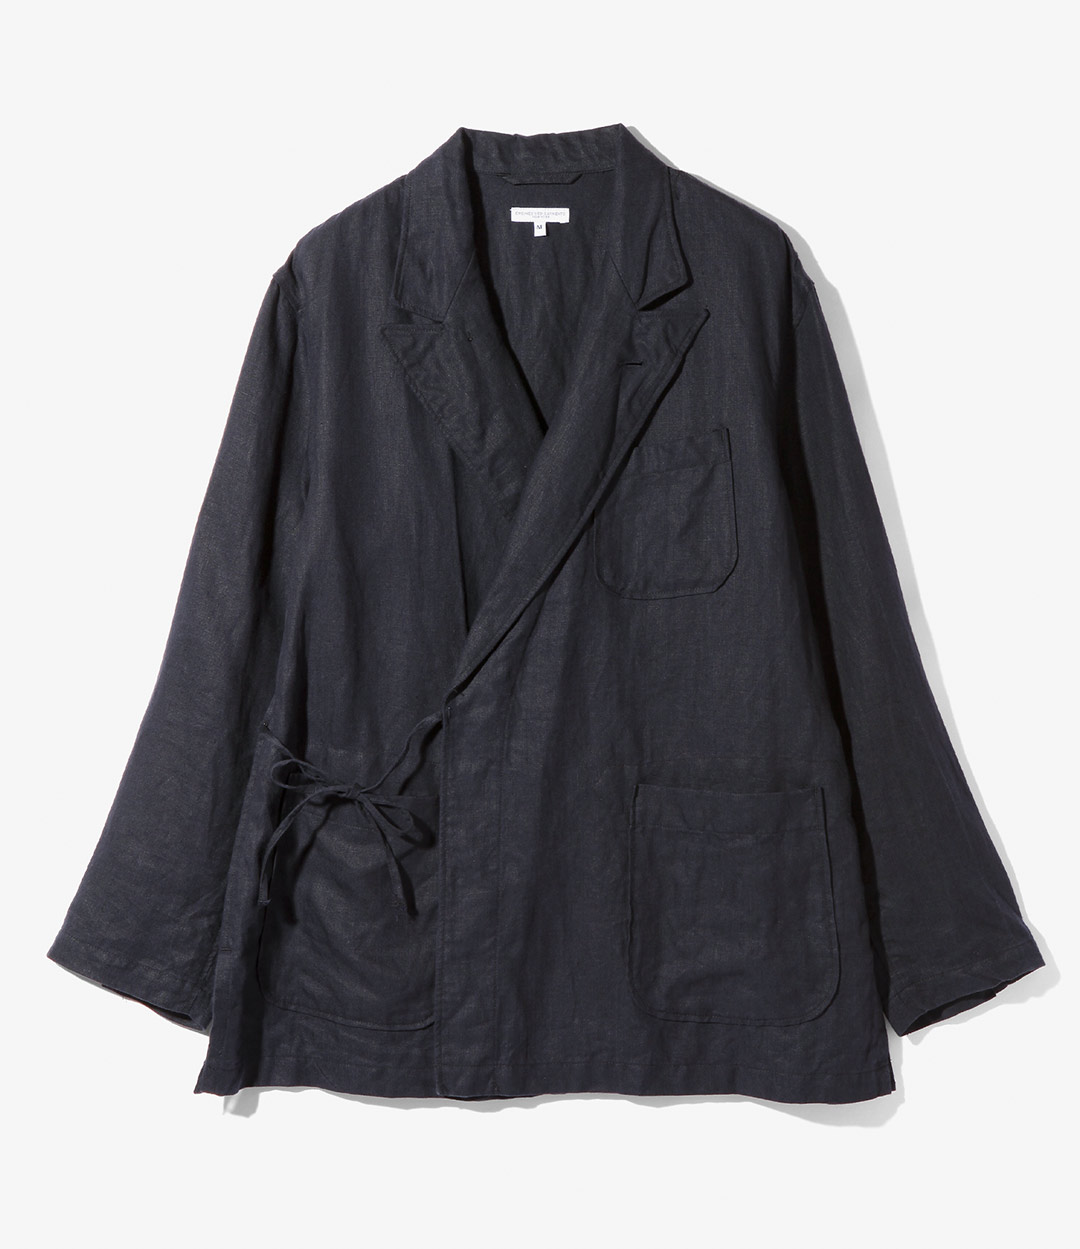 ENGINEERED GARMENTS〉新モデル 「D SUM JACKET」 が登場 | NEPENTHES